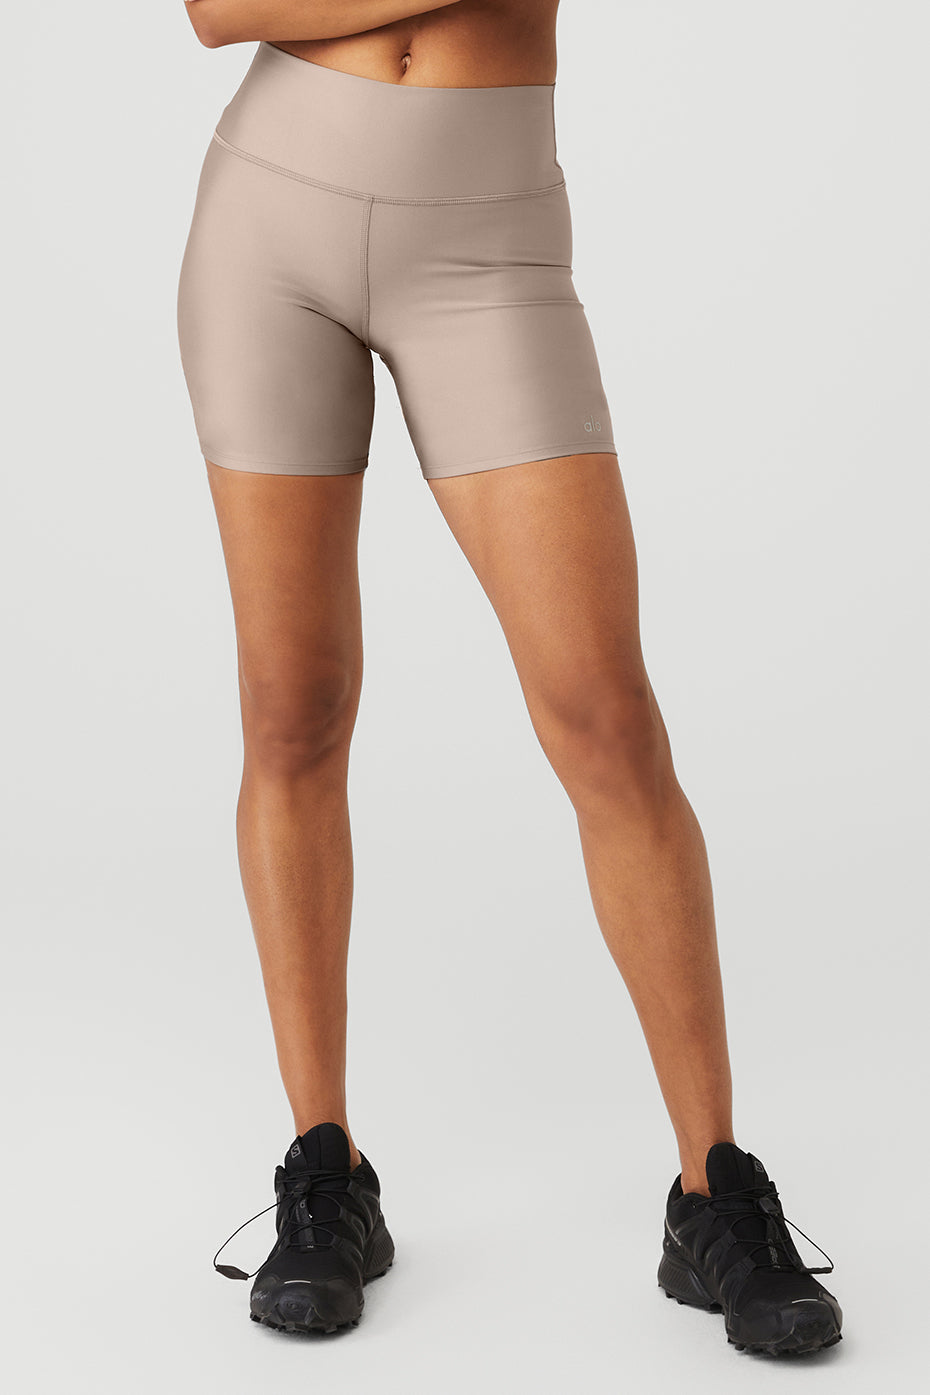 5 Airlift Energy Short - Taupe